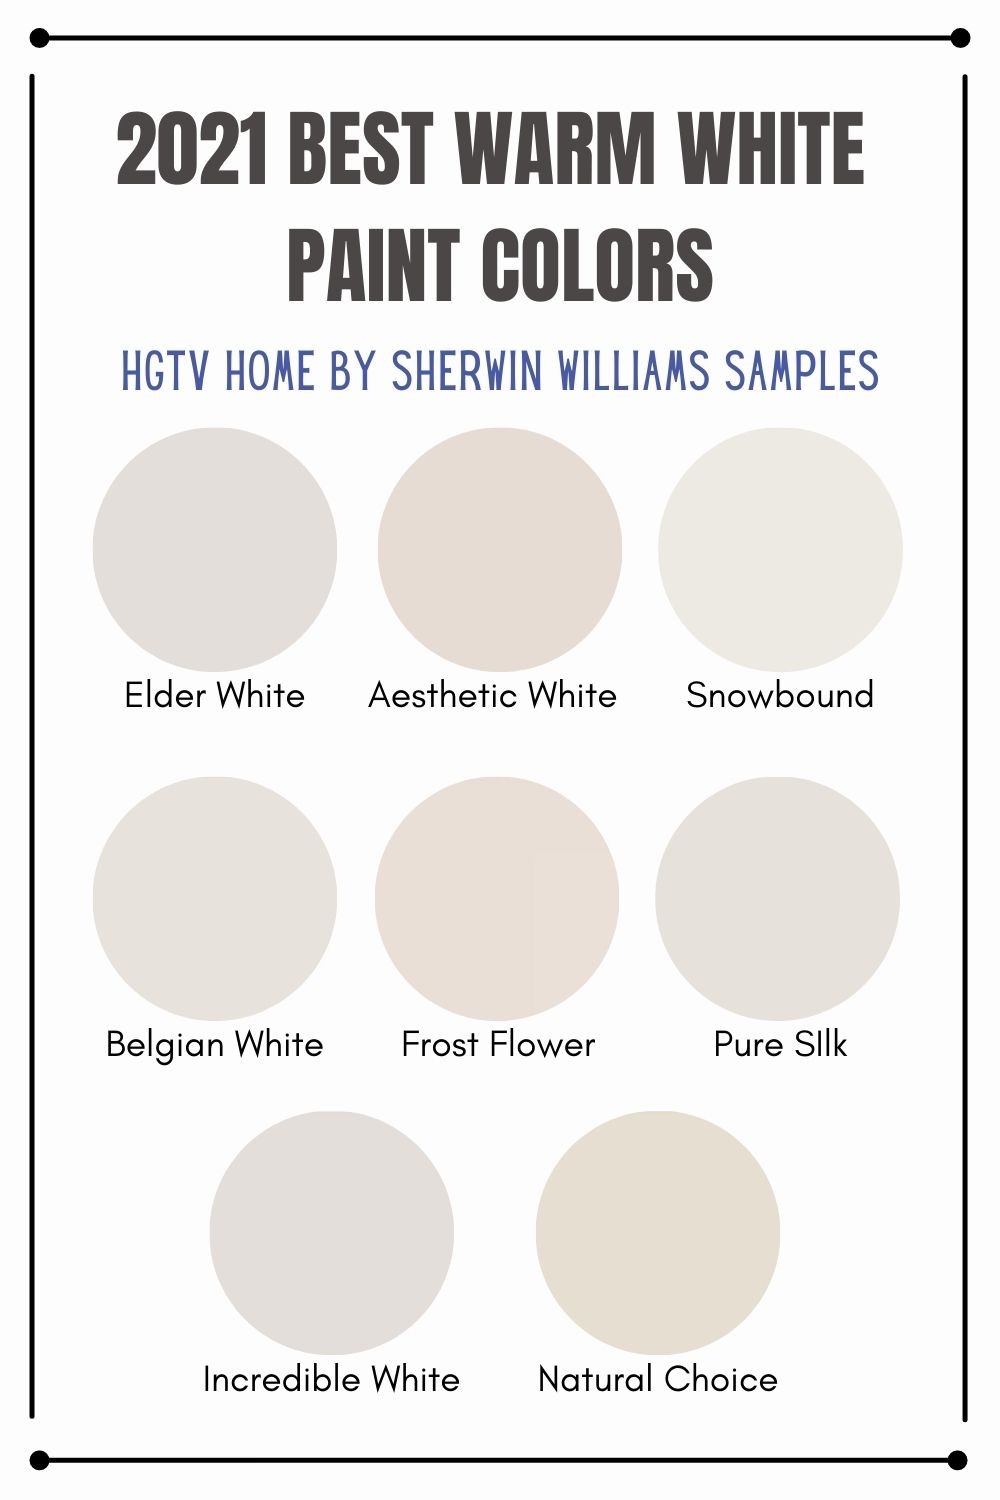 2021 BEST WARM WHITE PAINT COLORS - HGTV HOME by SHERWIN WILLIAMS